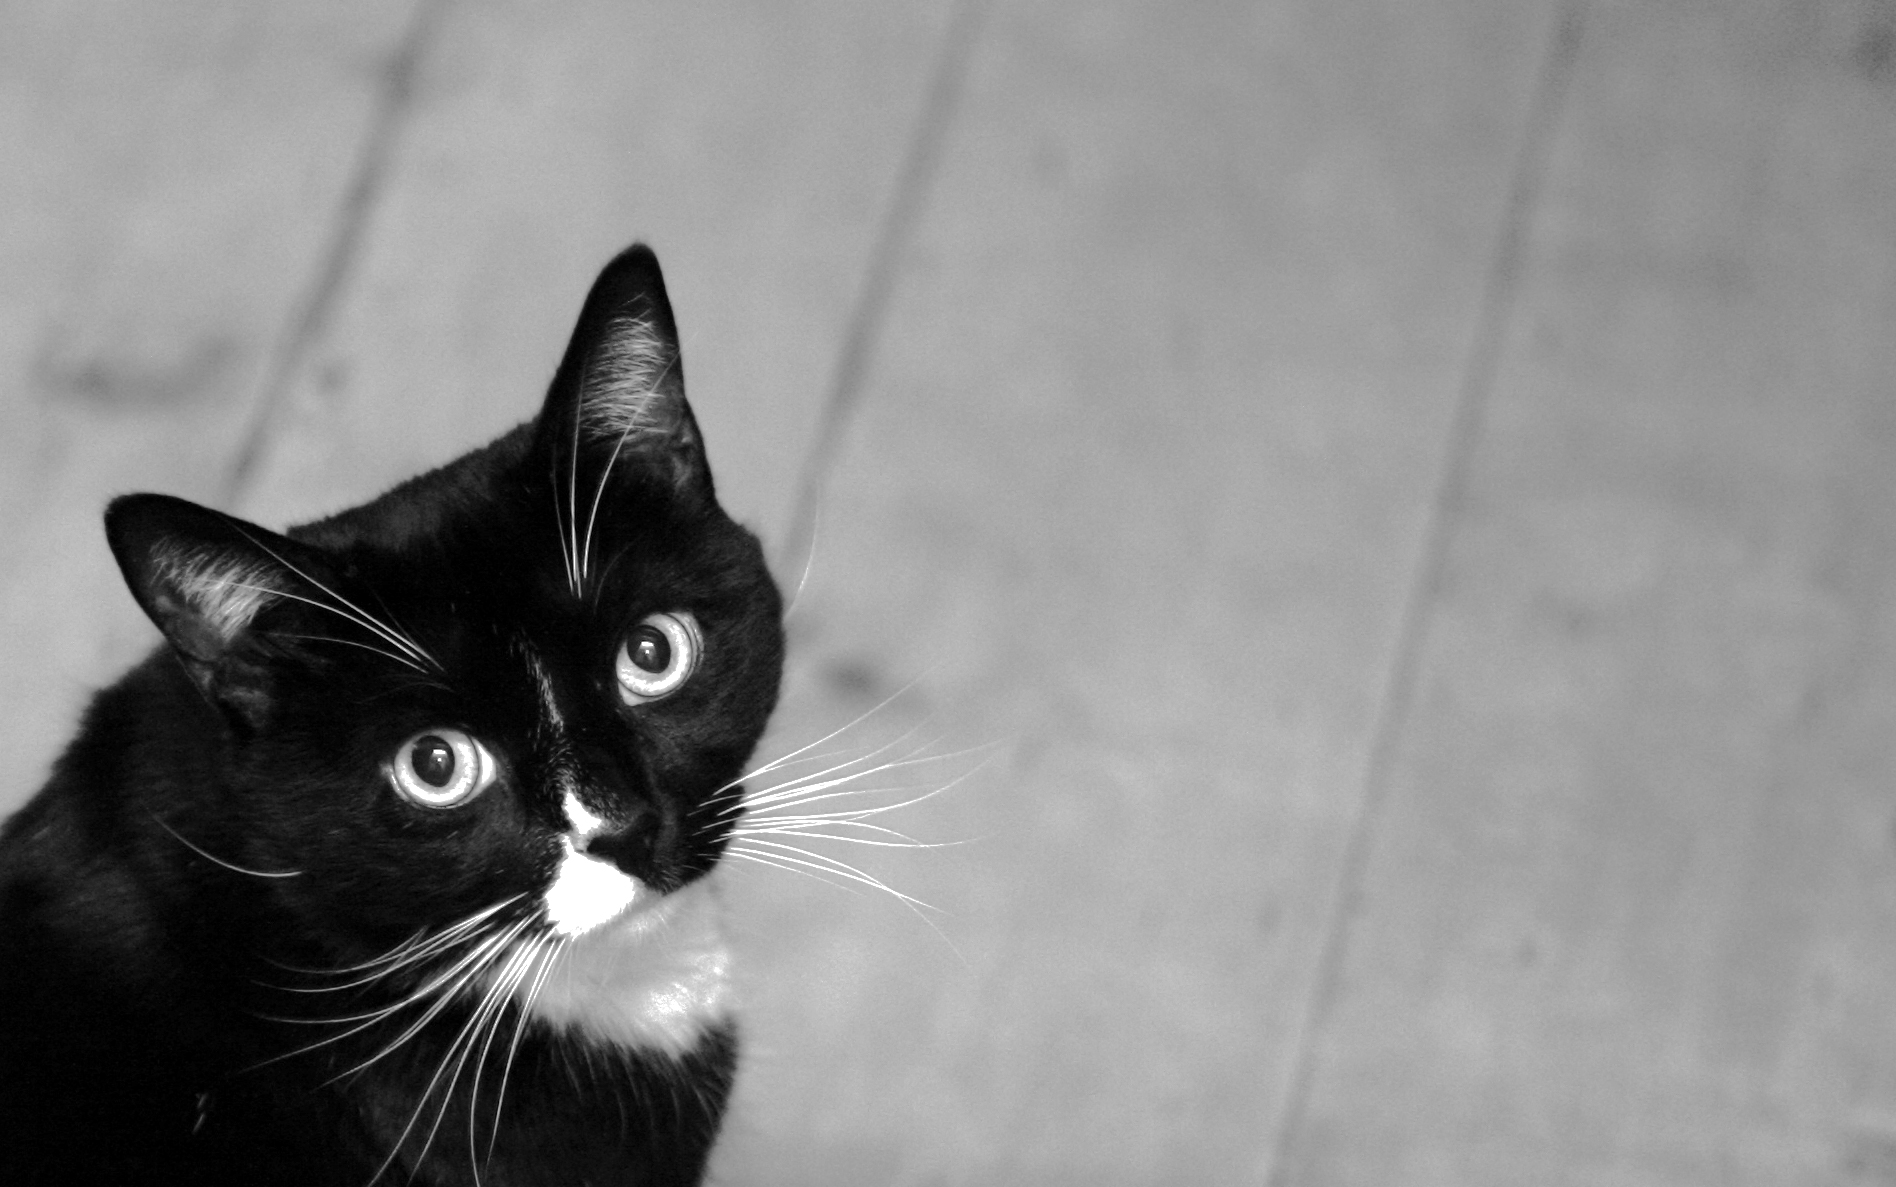 a black cat with big eyes looks to the right